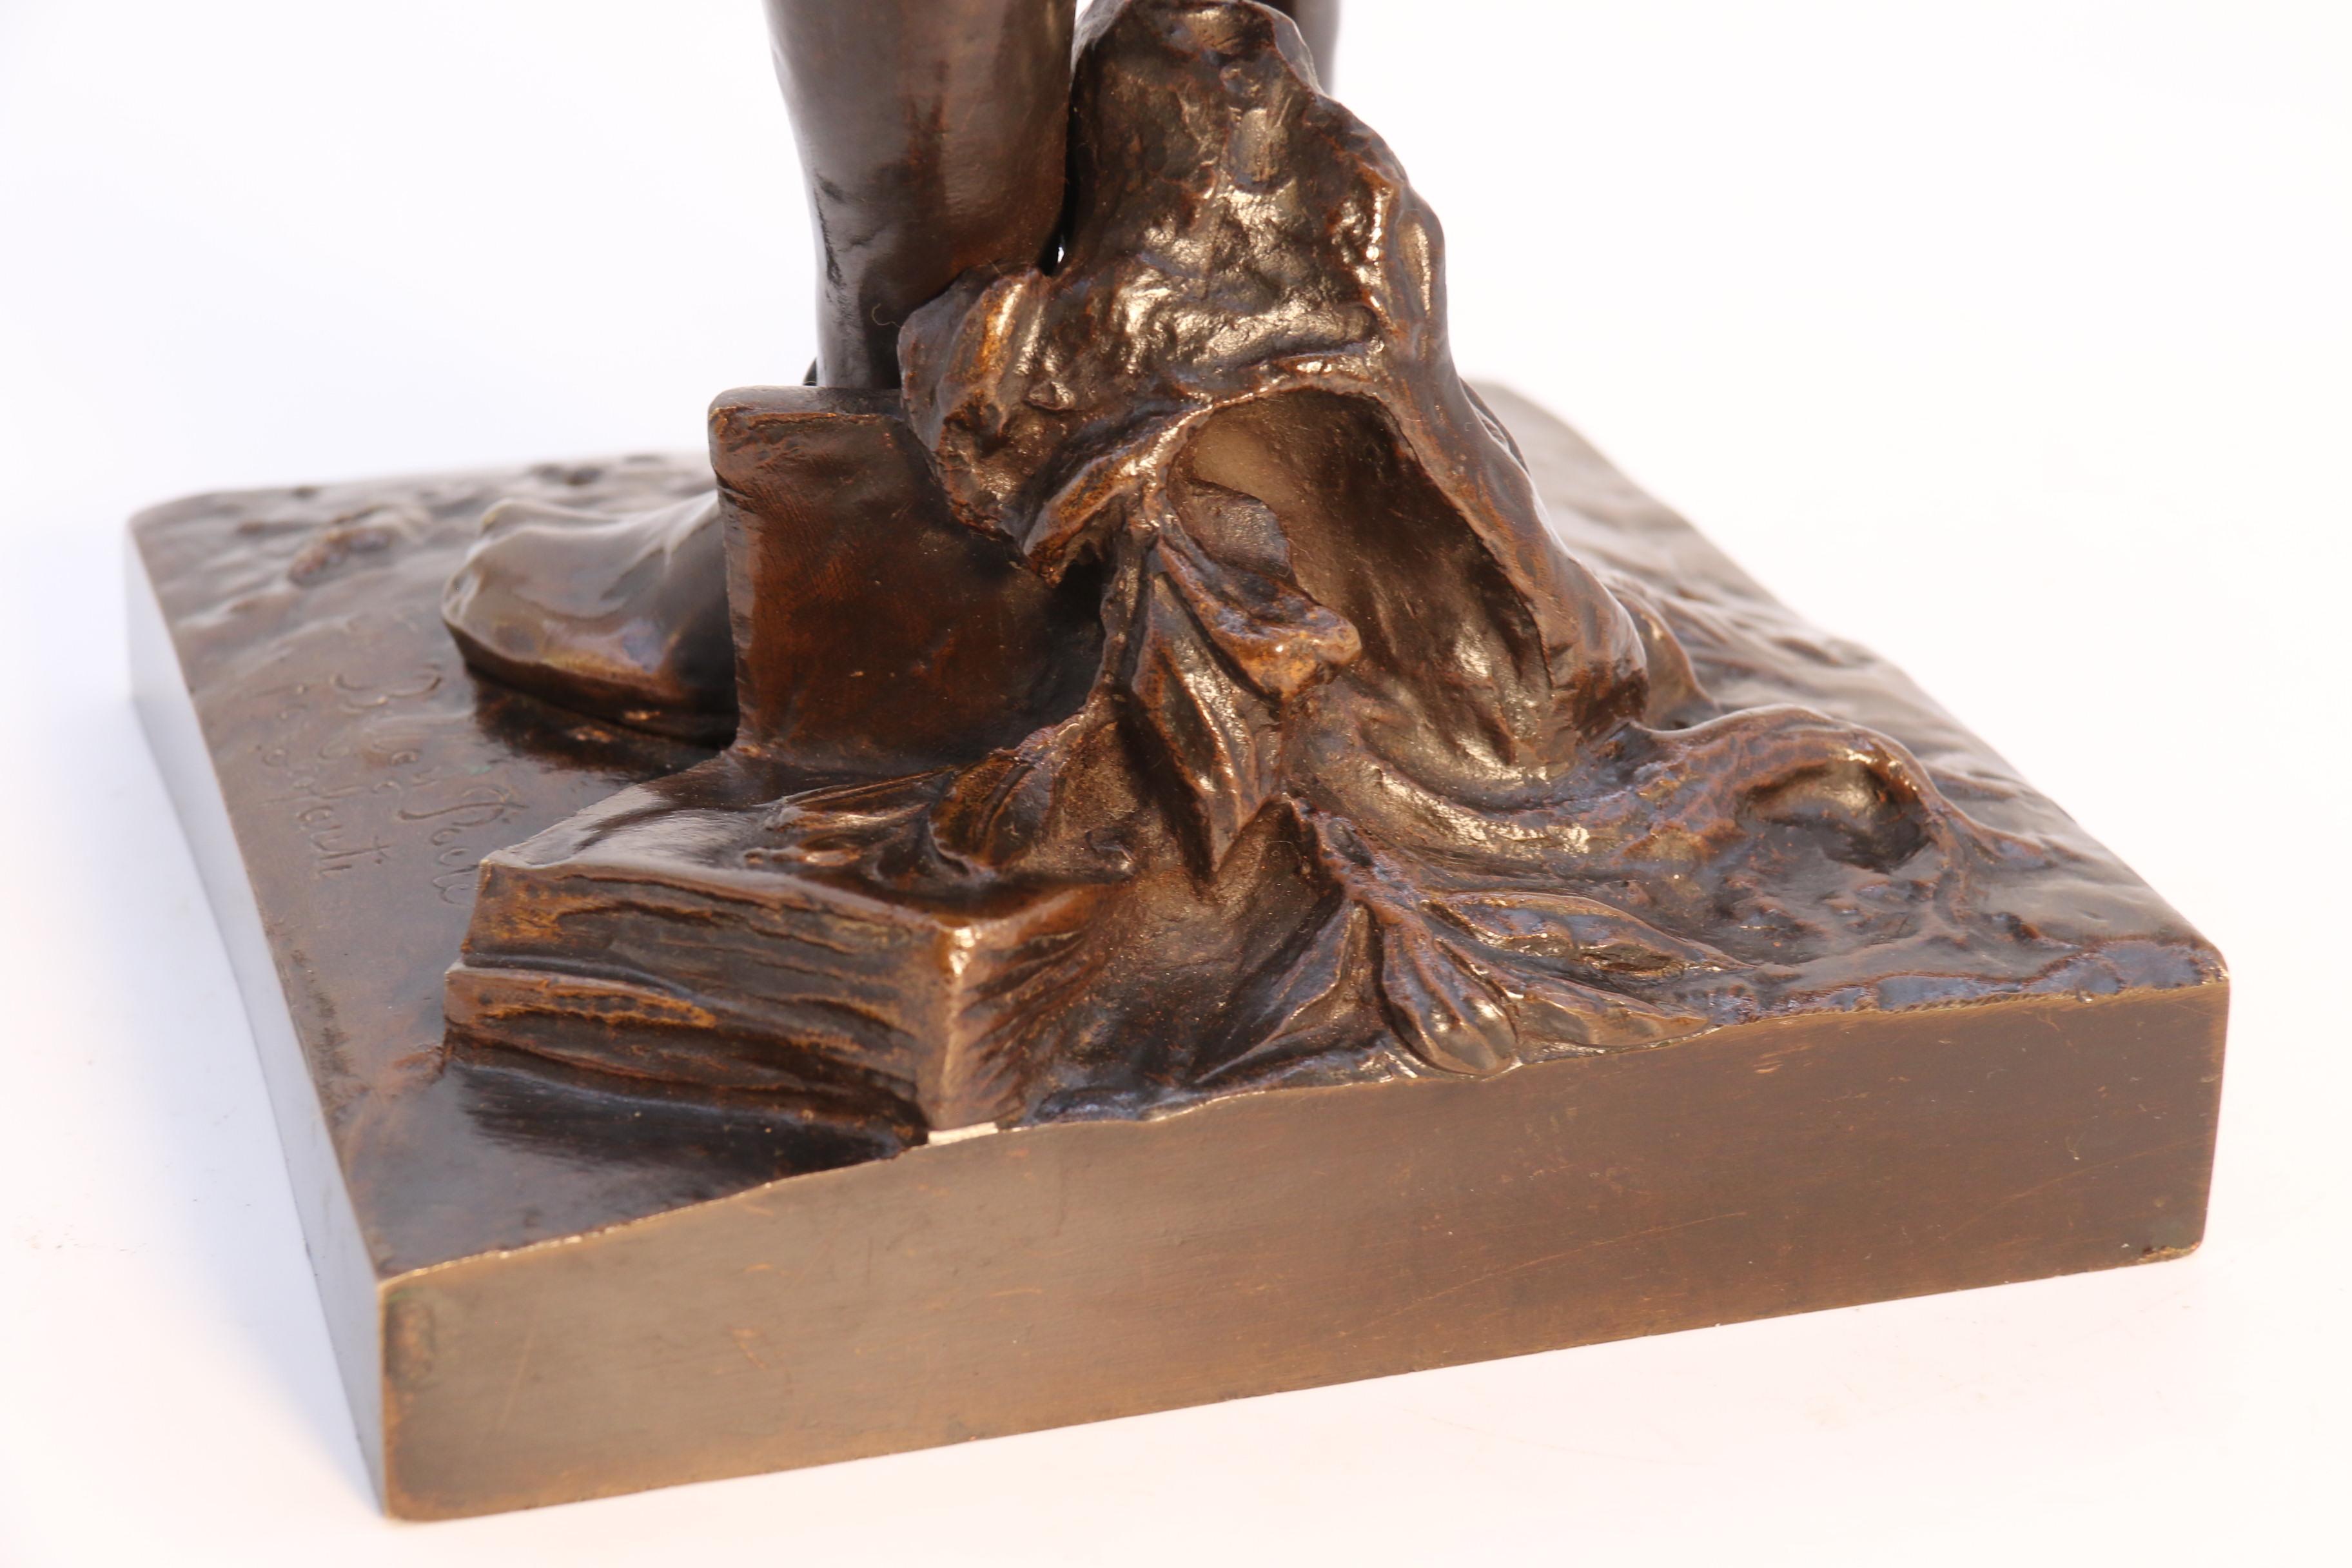 The 19th century bronze study of the French poet Joachim de Bellay by L Adolphe en vente 11